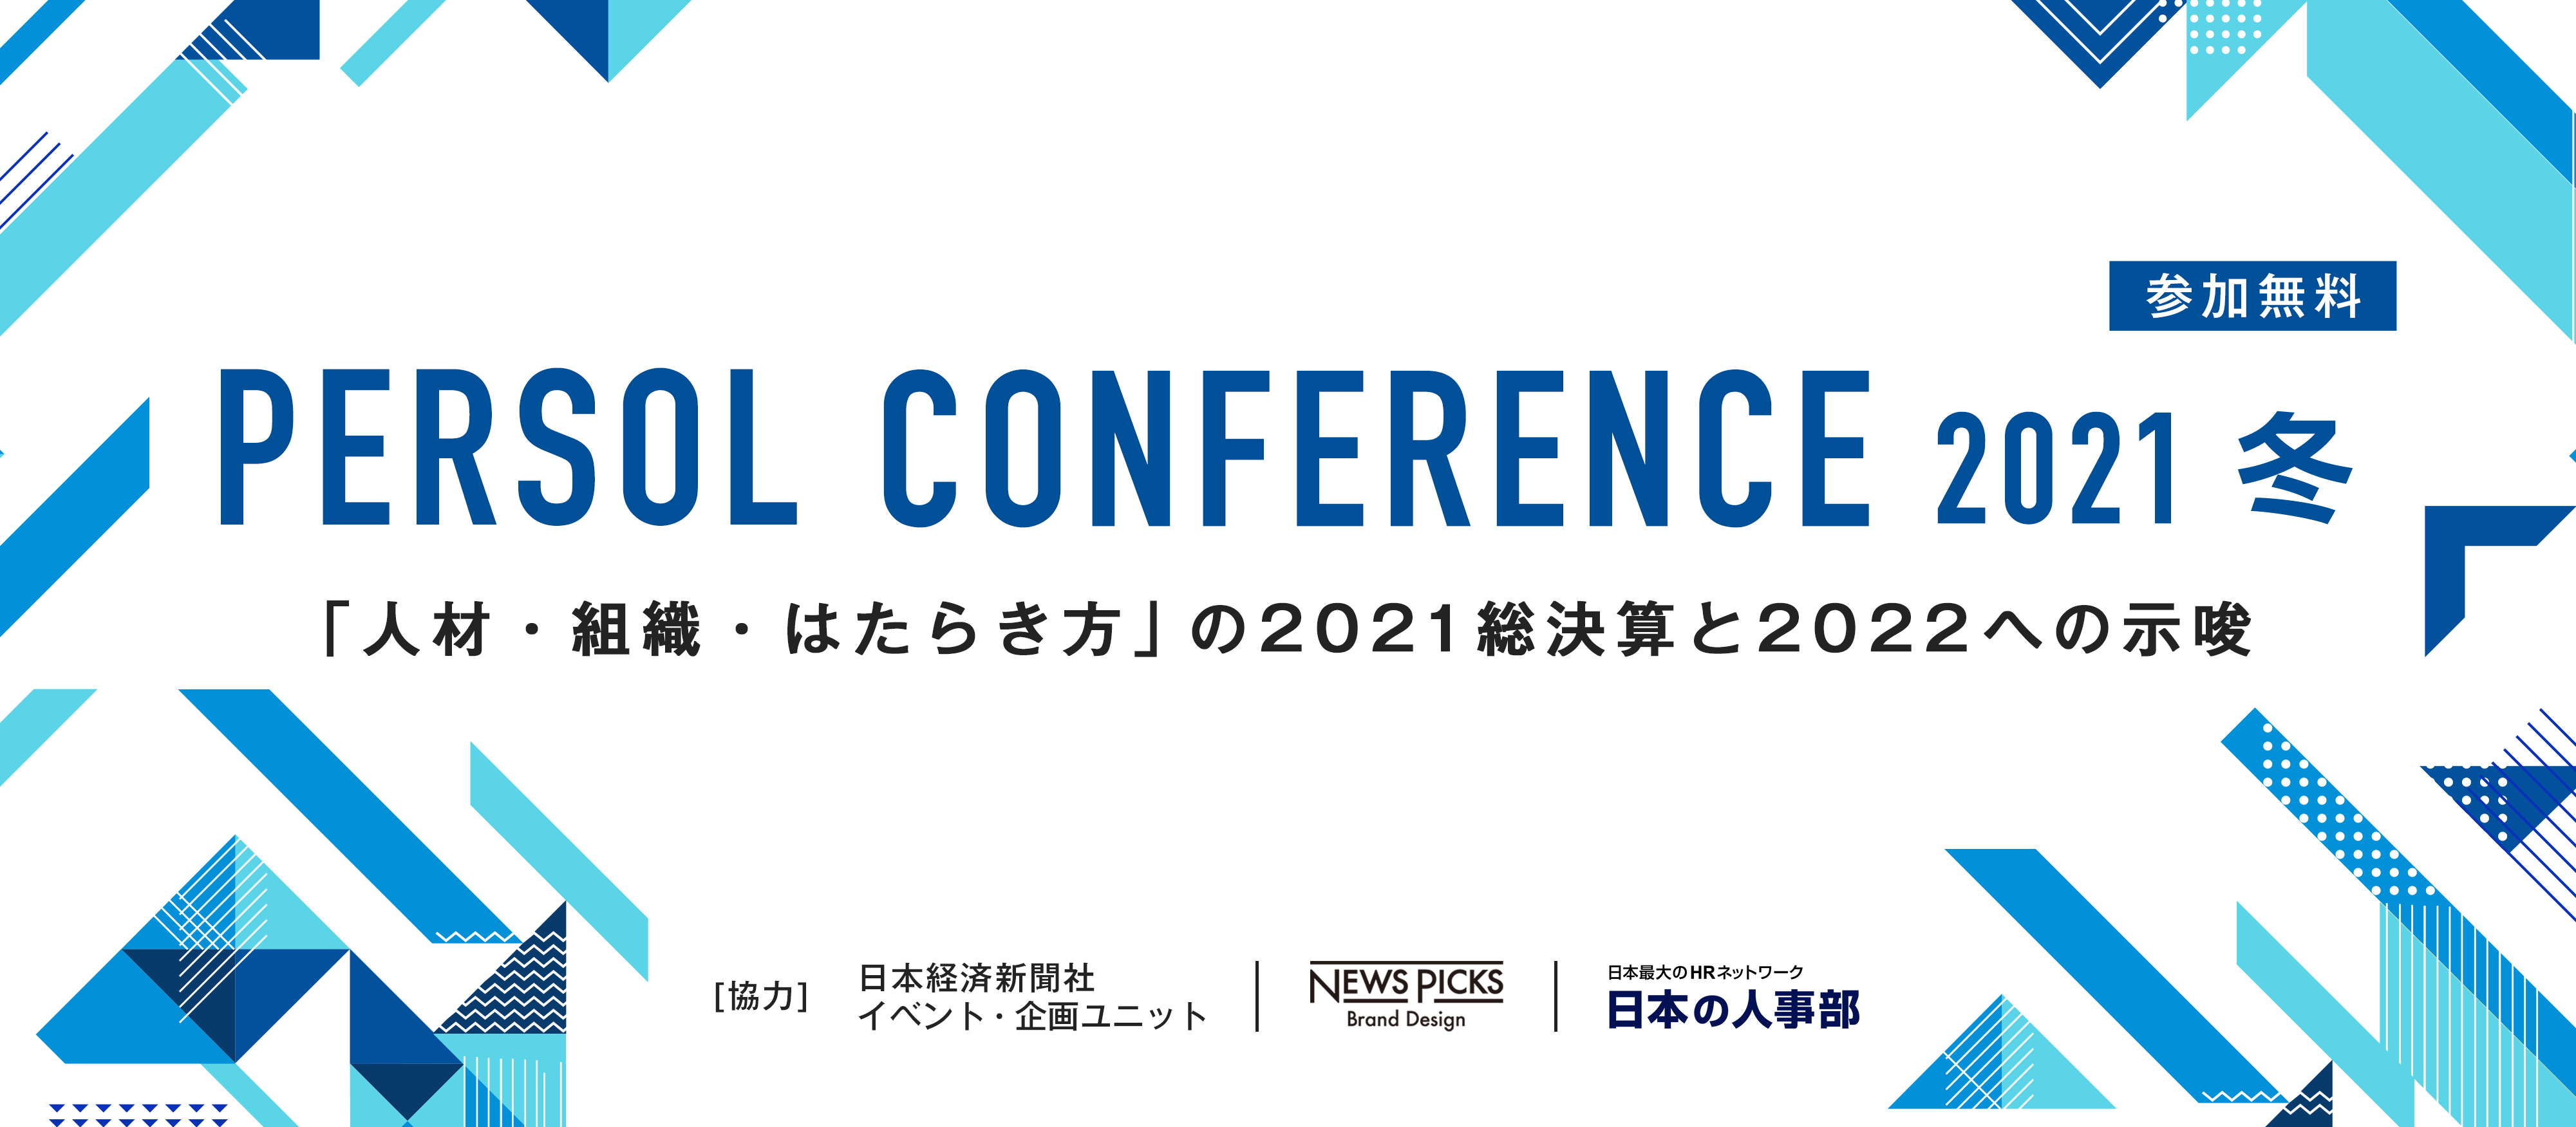 PERSOL CONFERENCE 2021 冬